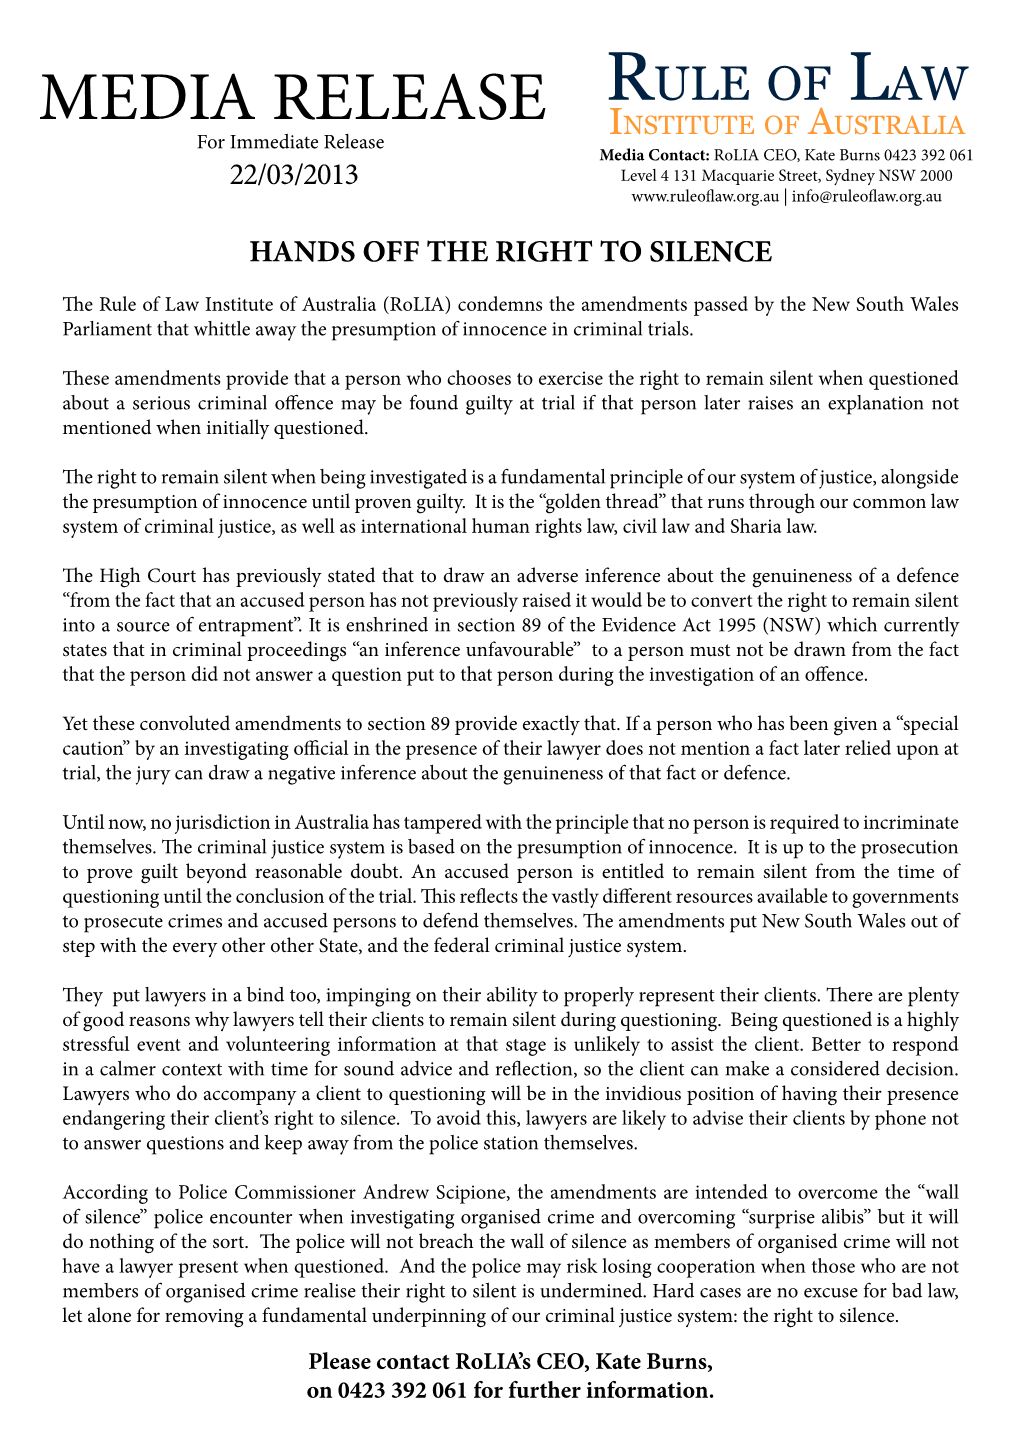 Media Release: HANDS OFF the RIGHT to SILENCE